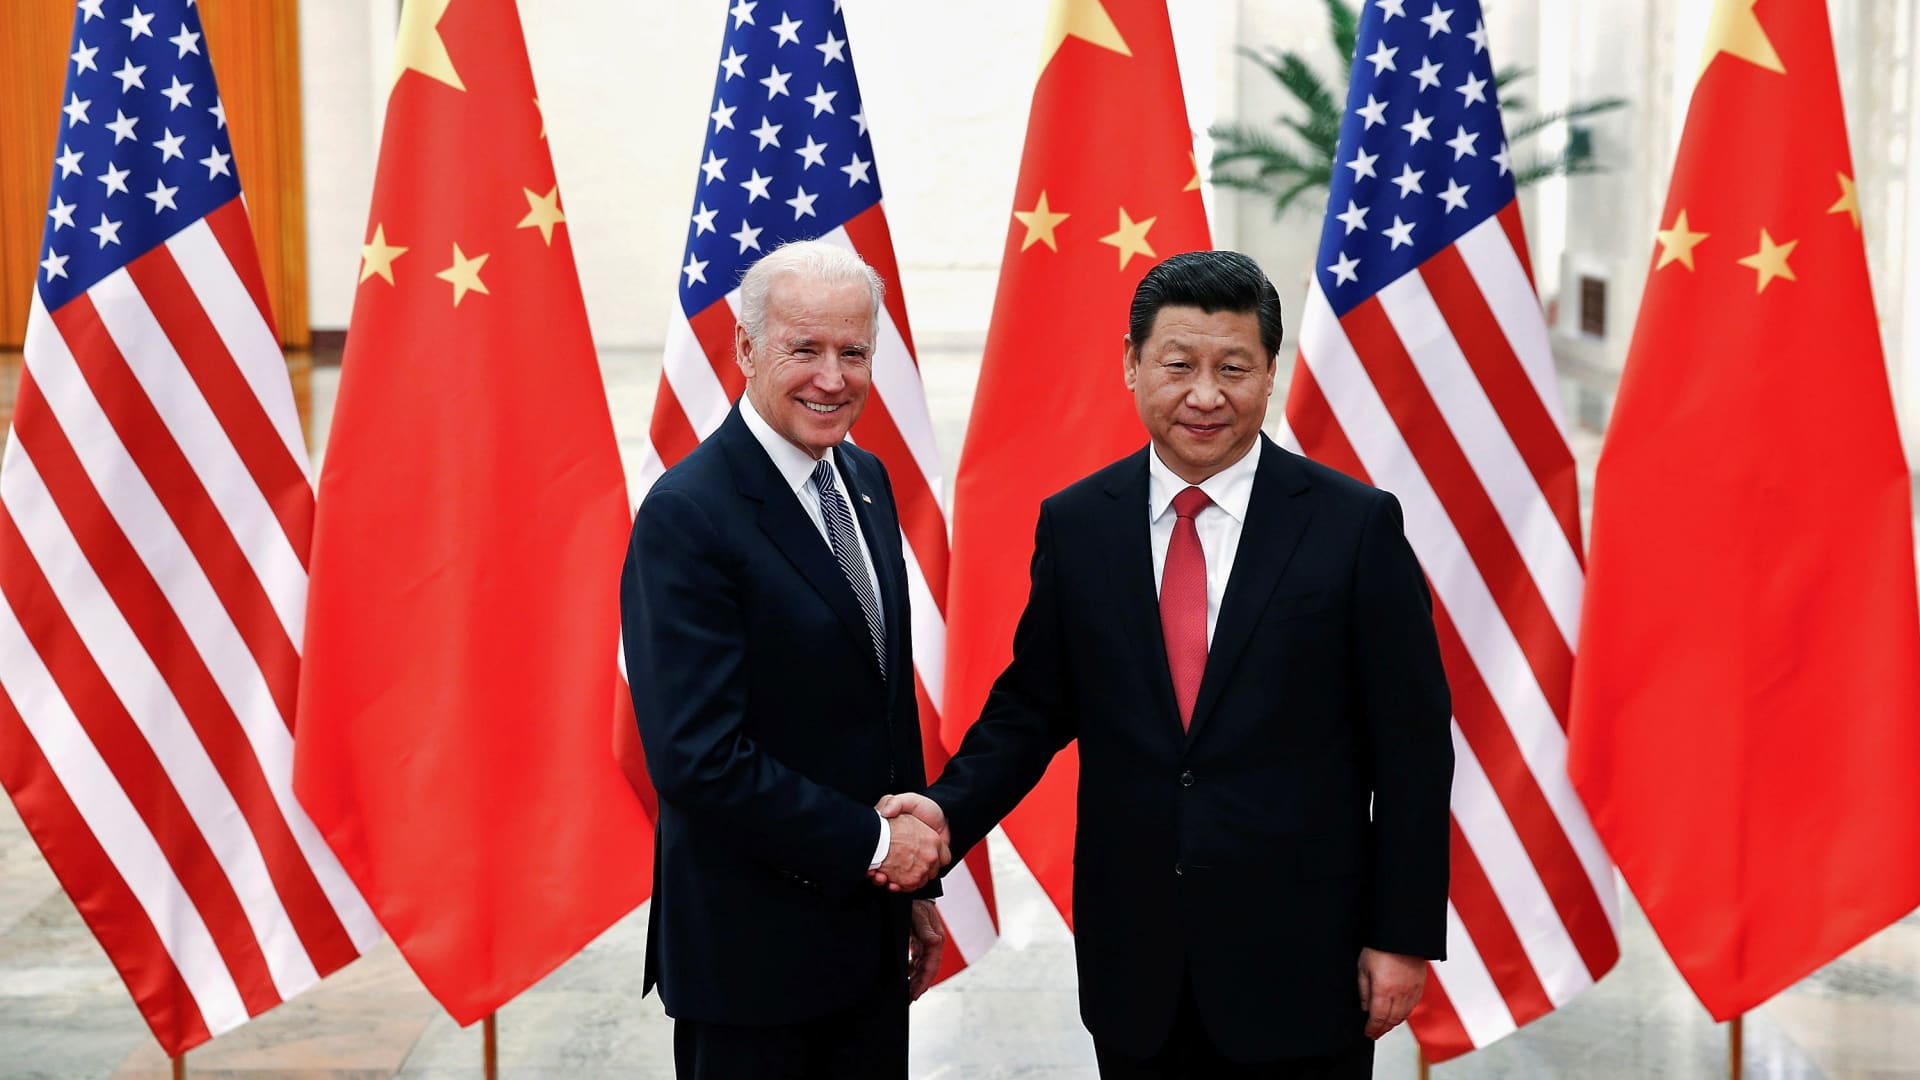 Chinese President Xi Jinping shakes hands with U.S. Vice President Joe Biden (L) inside the Great Hall of the People in Beijing December 4, 2013.